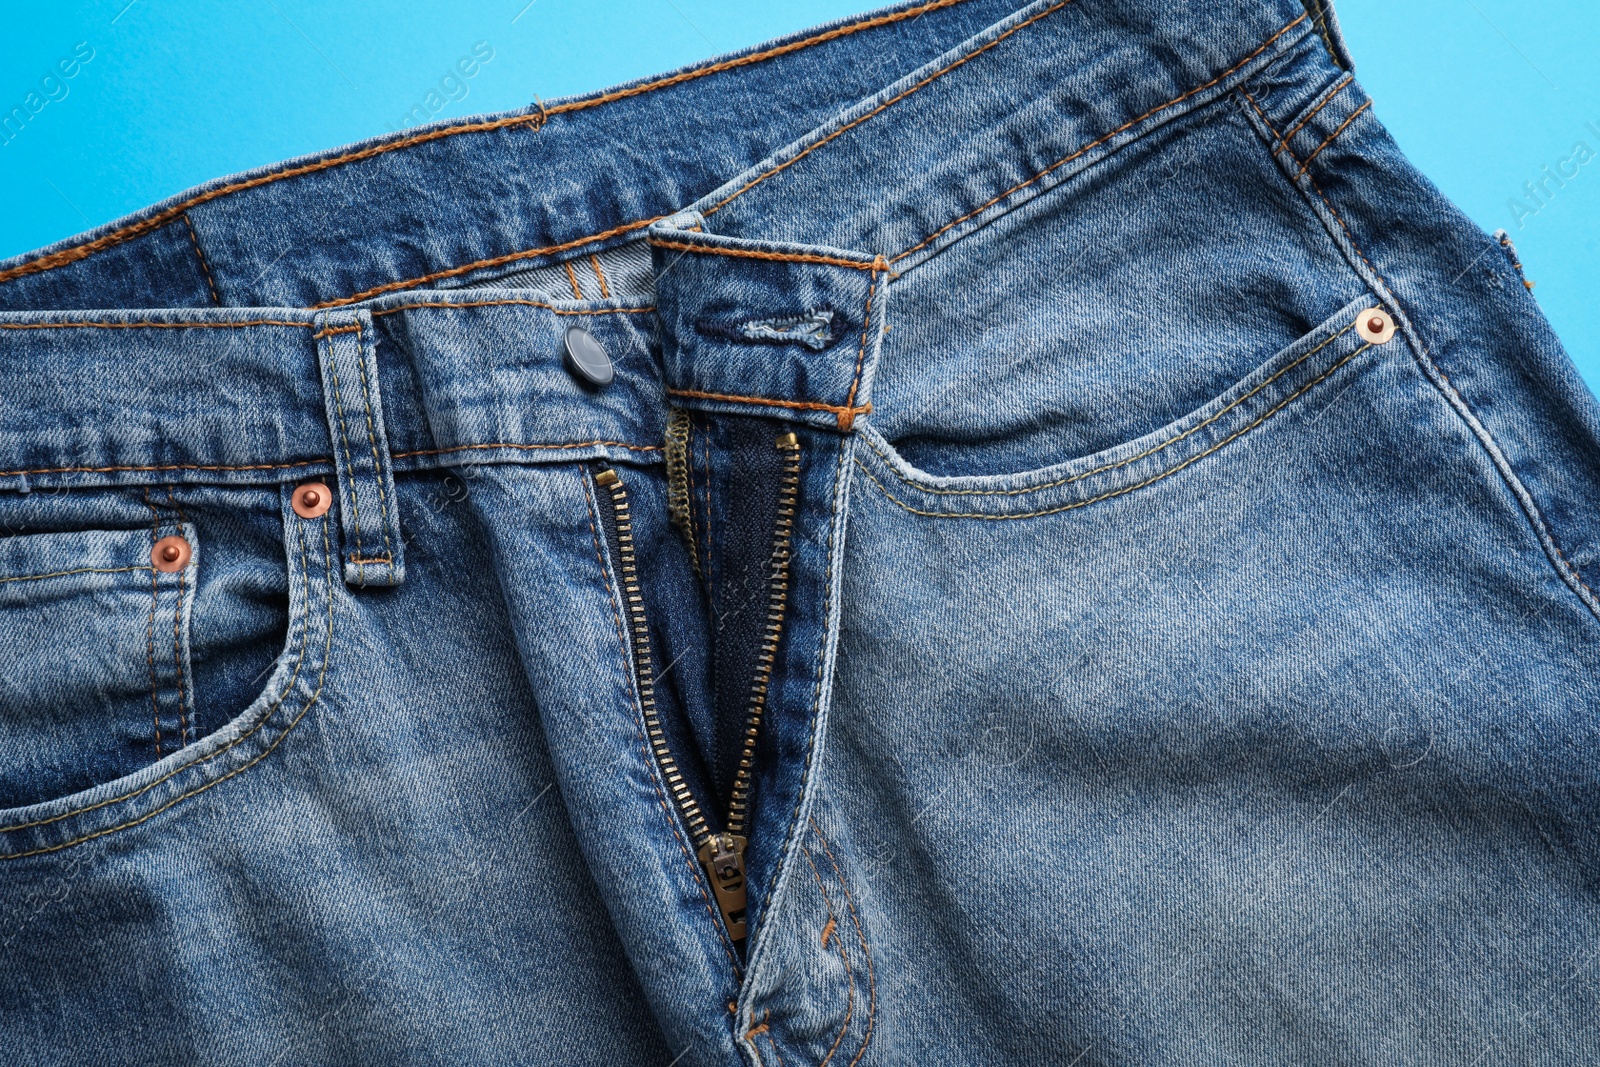 Photo of Jeans with unbuttoned fly on light blue background, top view. Exhibitionist concept